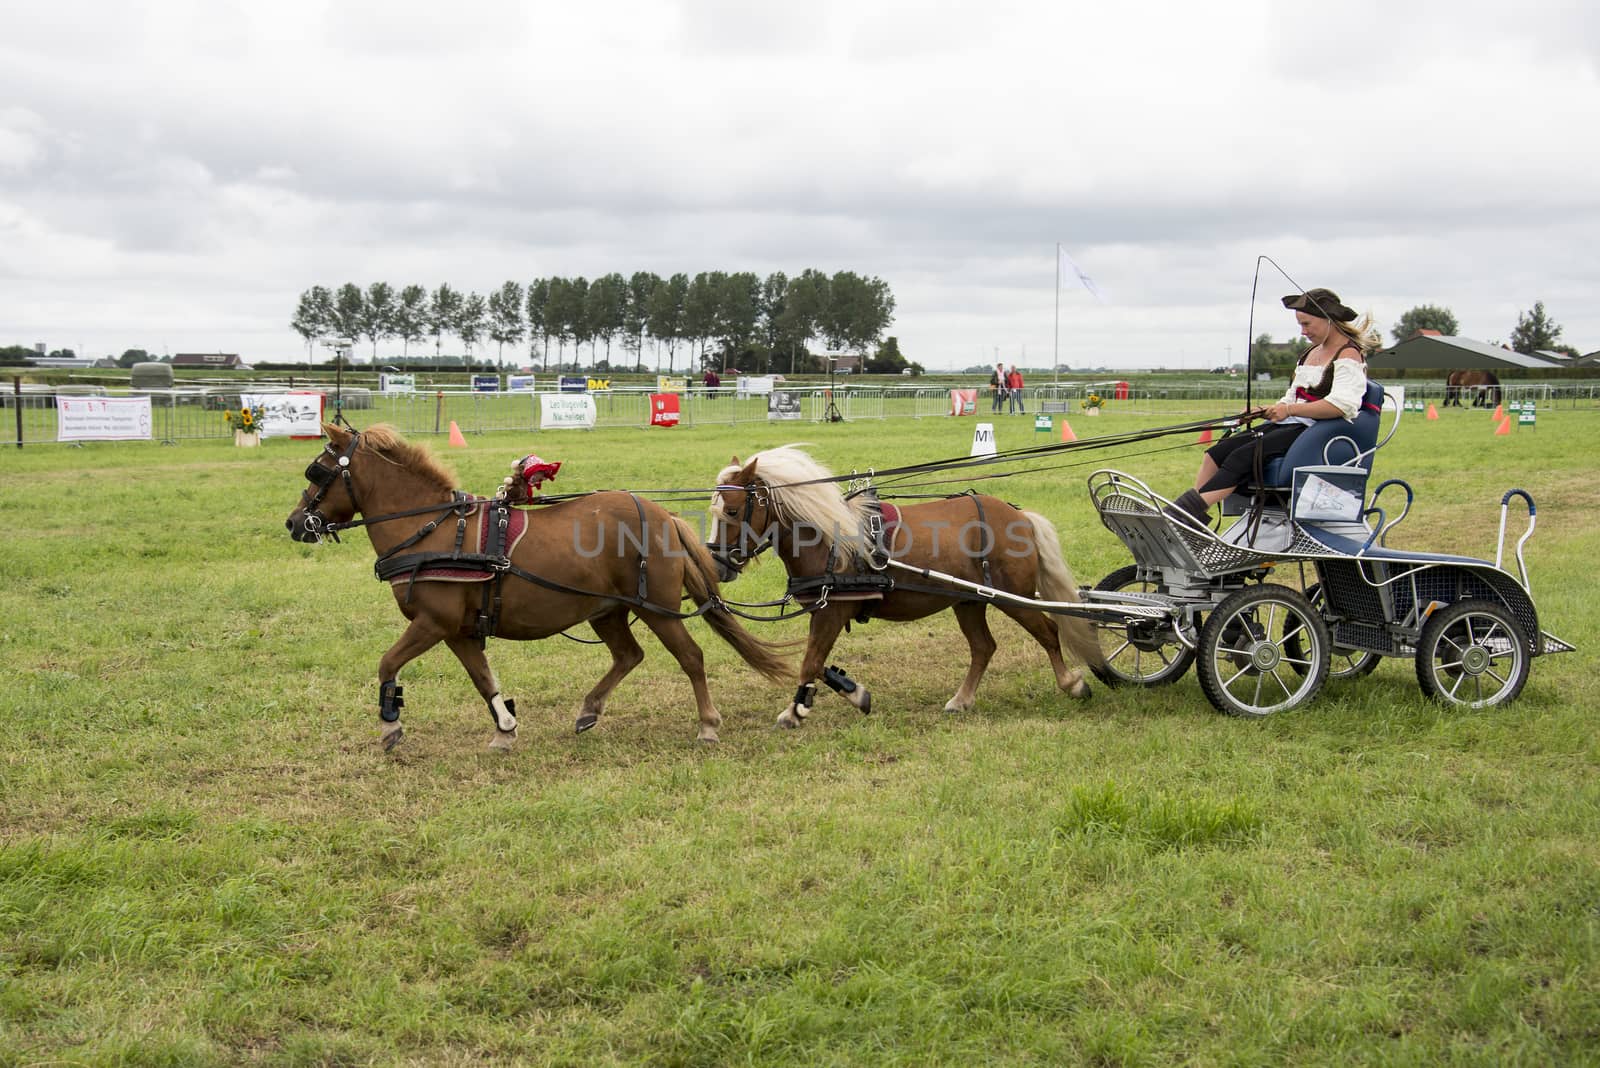 ROCKANJE, NETHERLANDS - AUGUST 18, 2015: Unknown girl participate in the power horse competition in Rockanje on August 18 2015. This competition is for international points